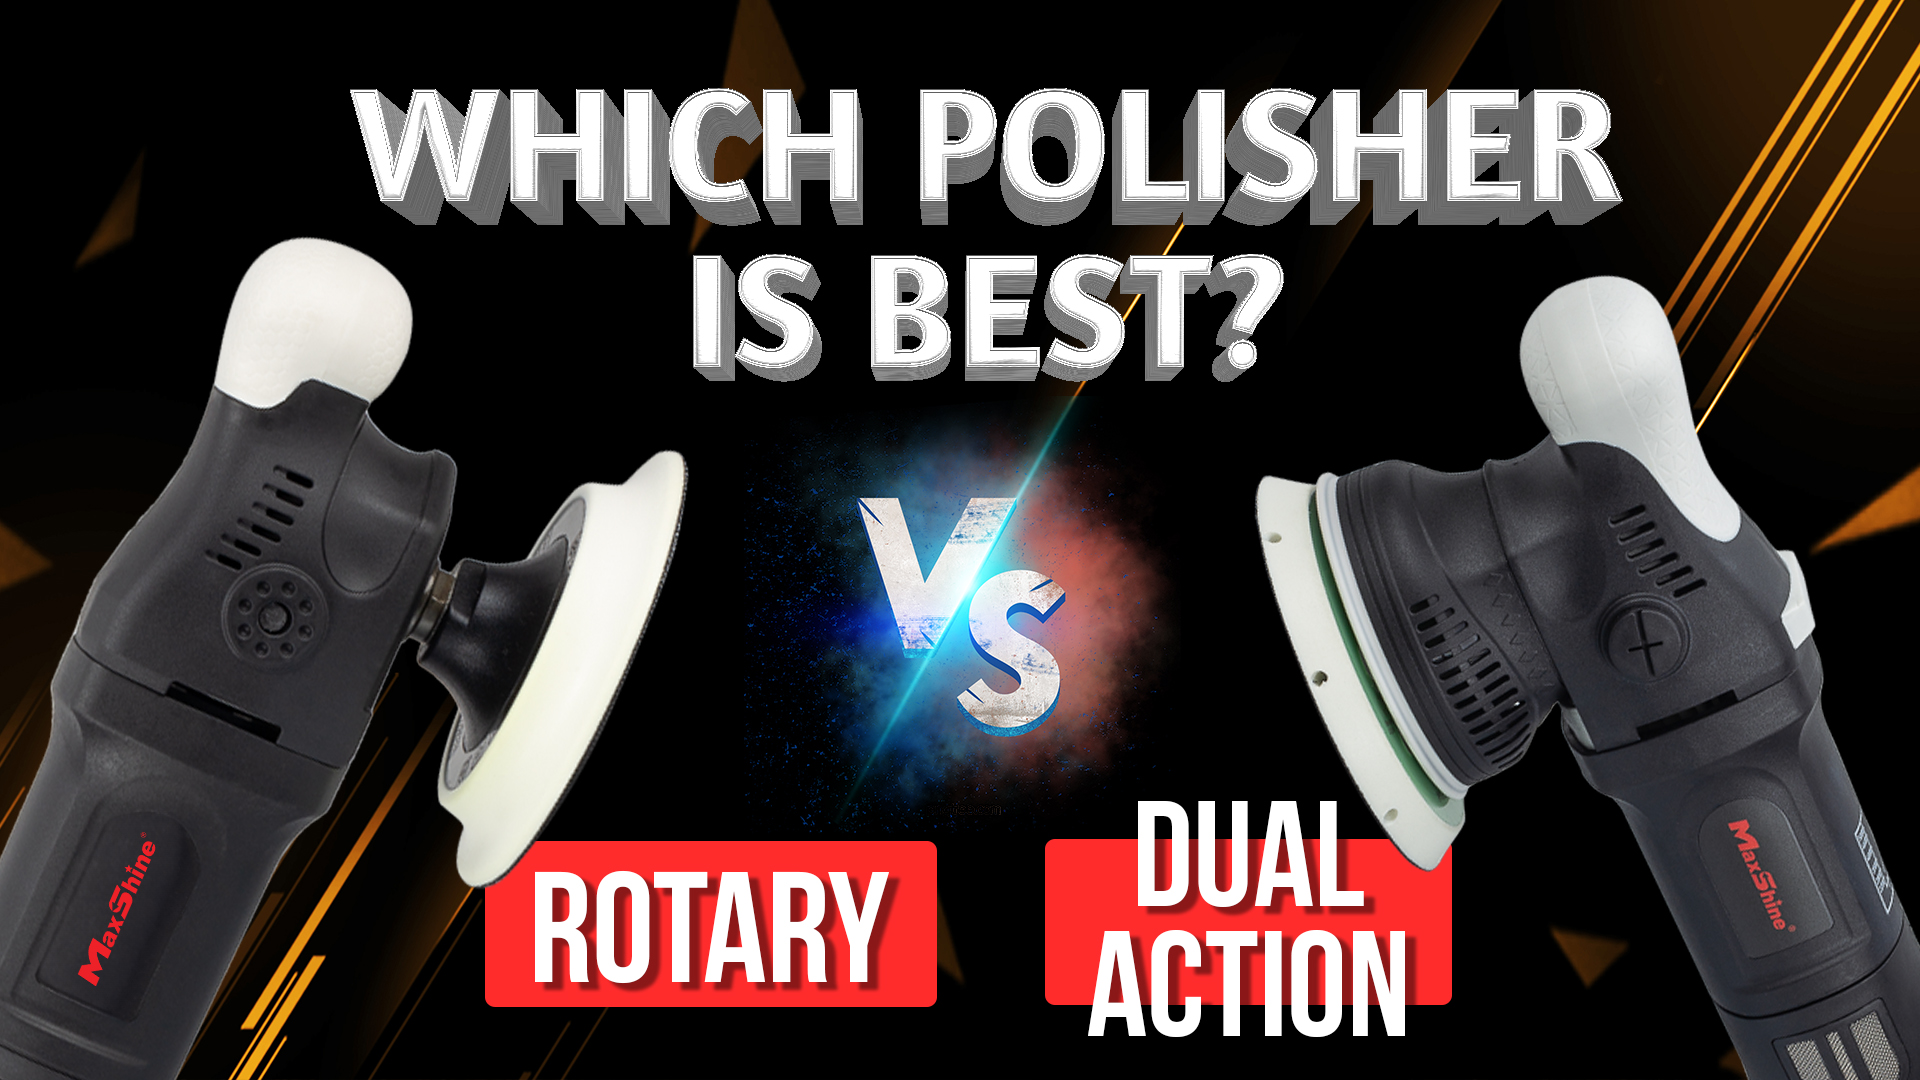 rotary vs dual action - Detailed Guide Comparing car polishers and buffers